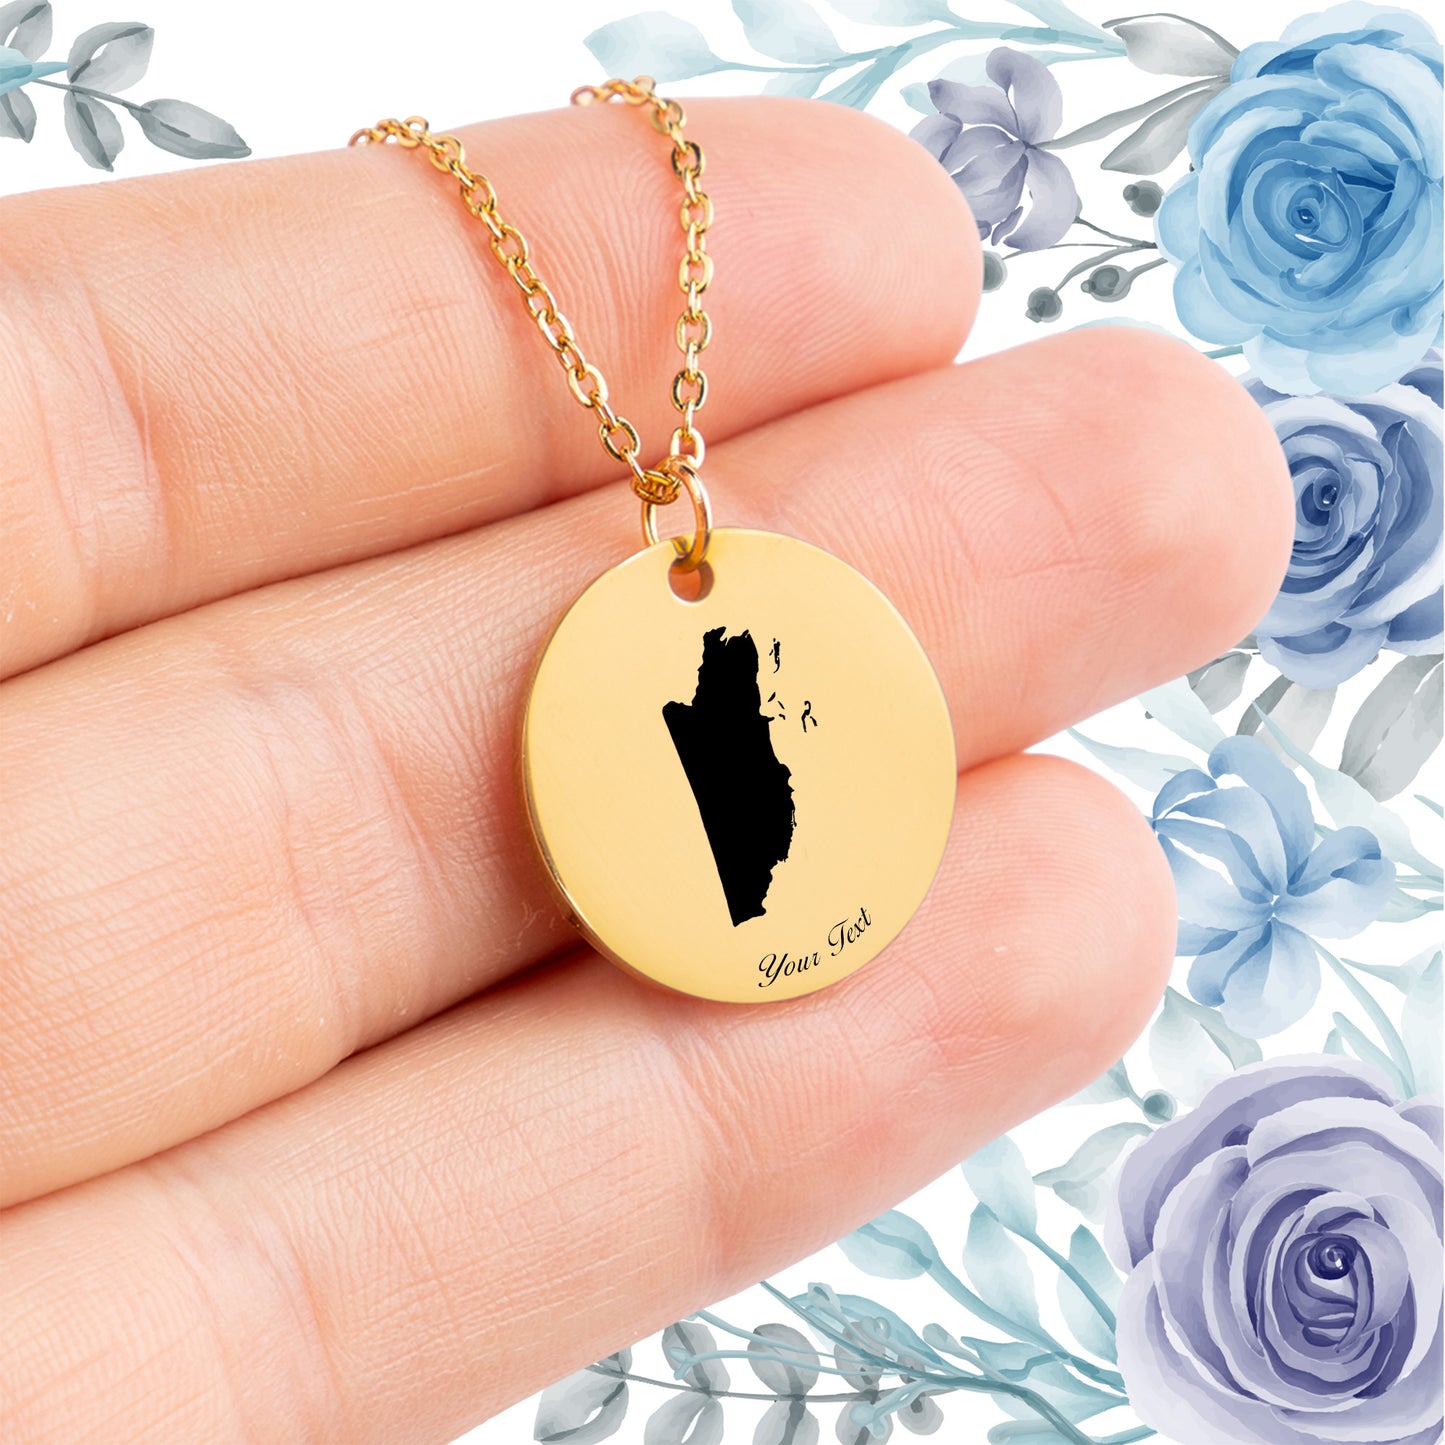 Belize Country Map Necklace - Personalizable Jewelry